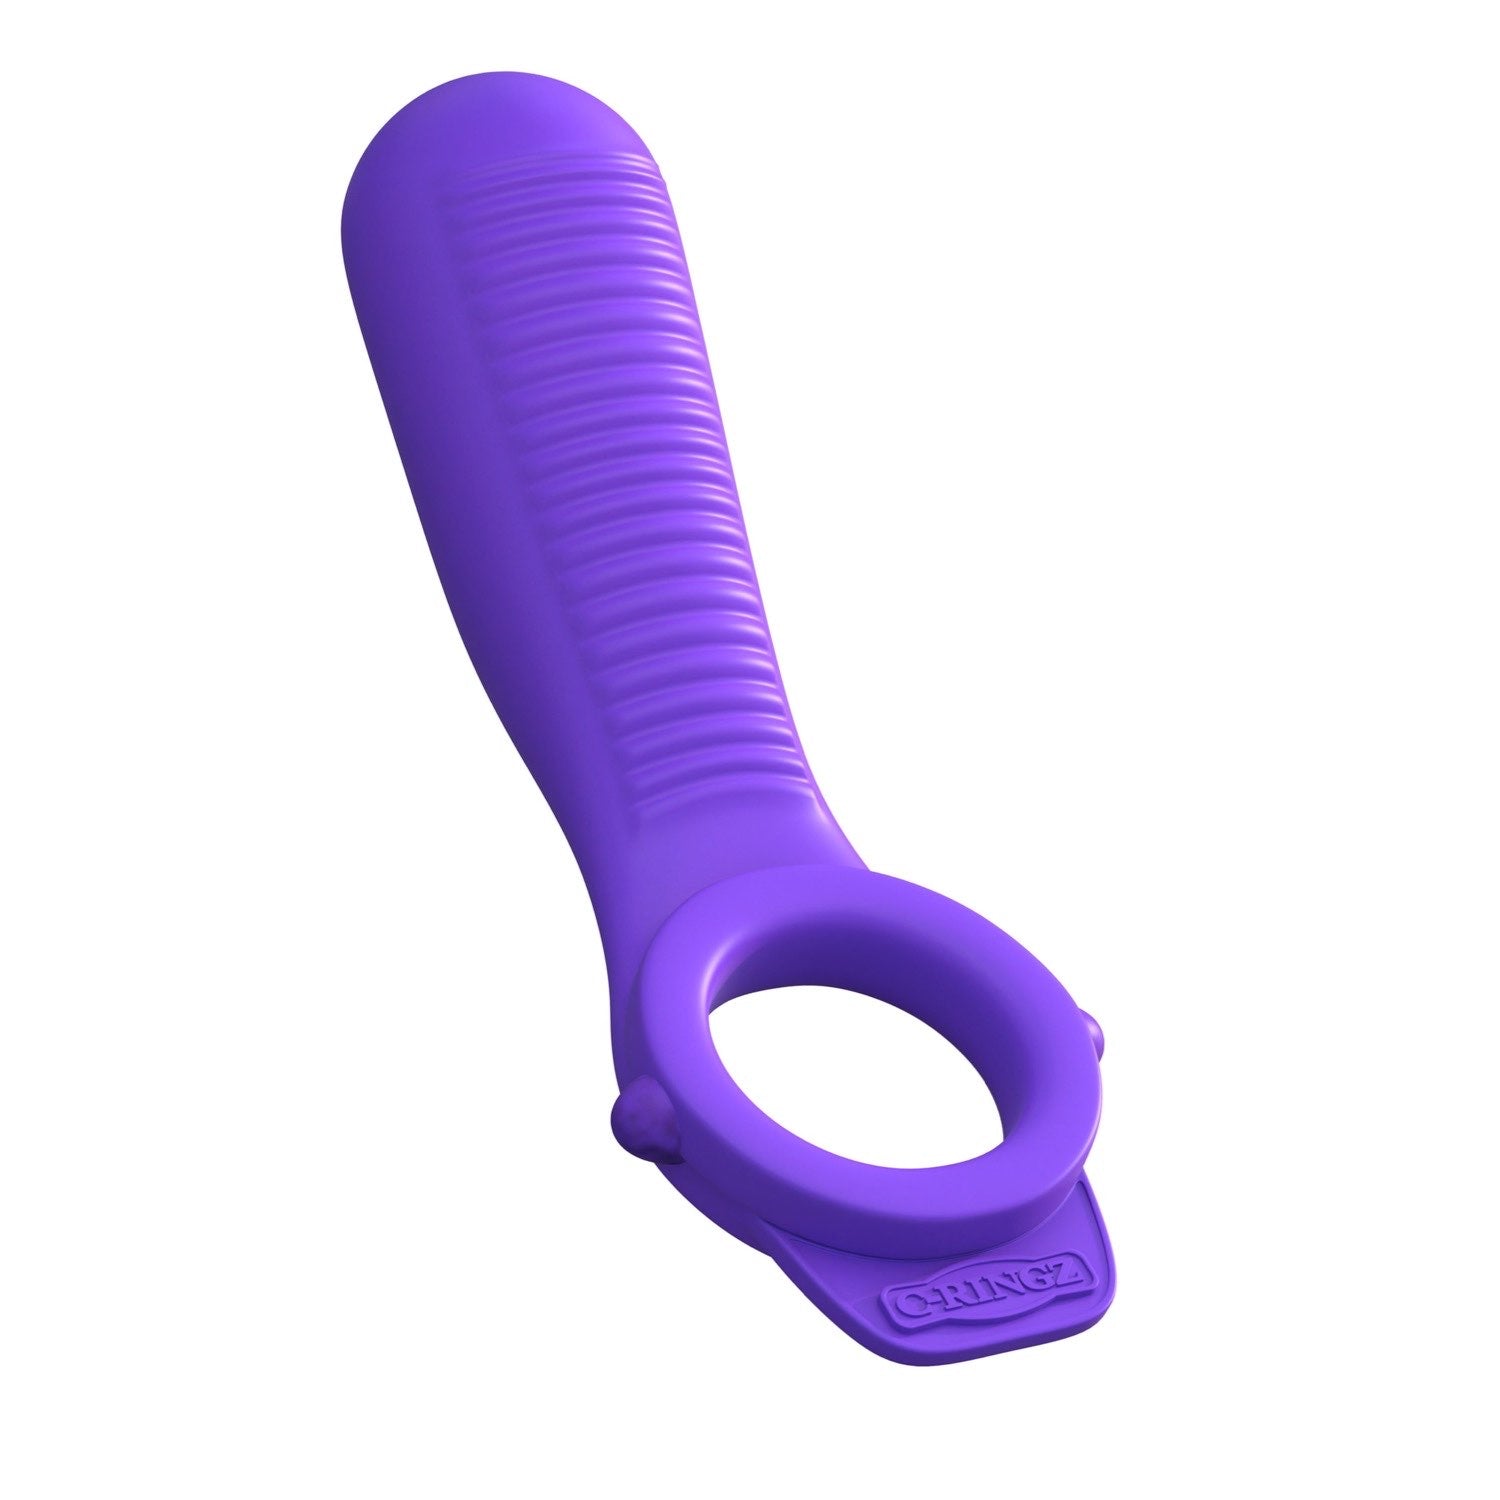 Fantasy C-Ringz Fantasy C-ringz Ride N&#39; Clide Couples Ring - Purple Vibrating Cock Ring by Pipedream